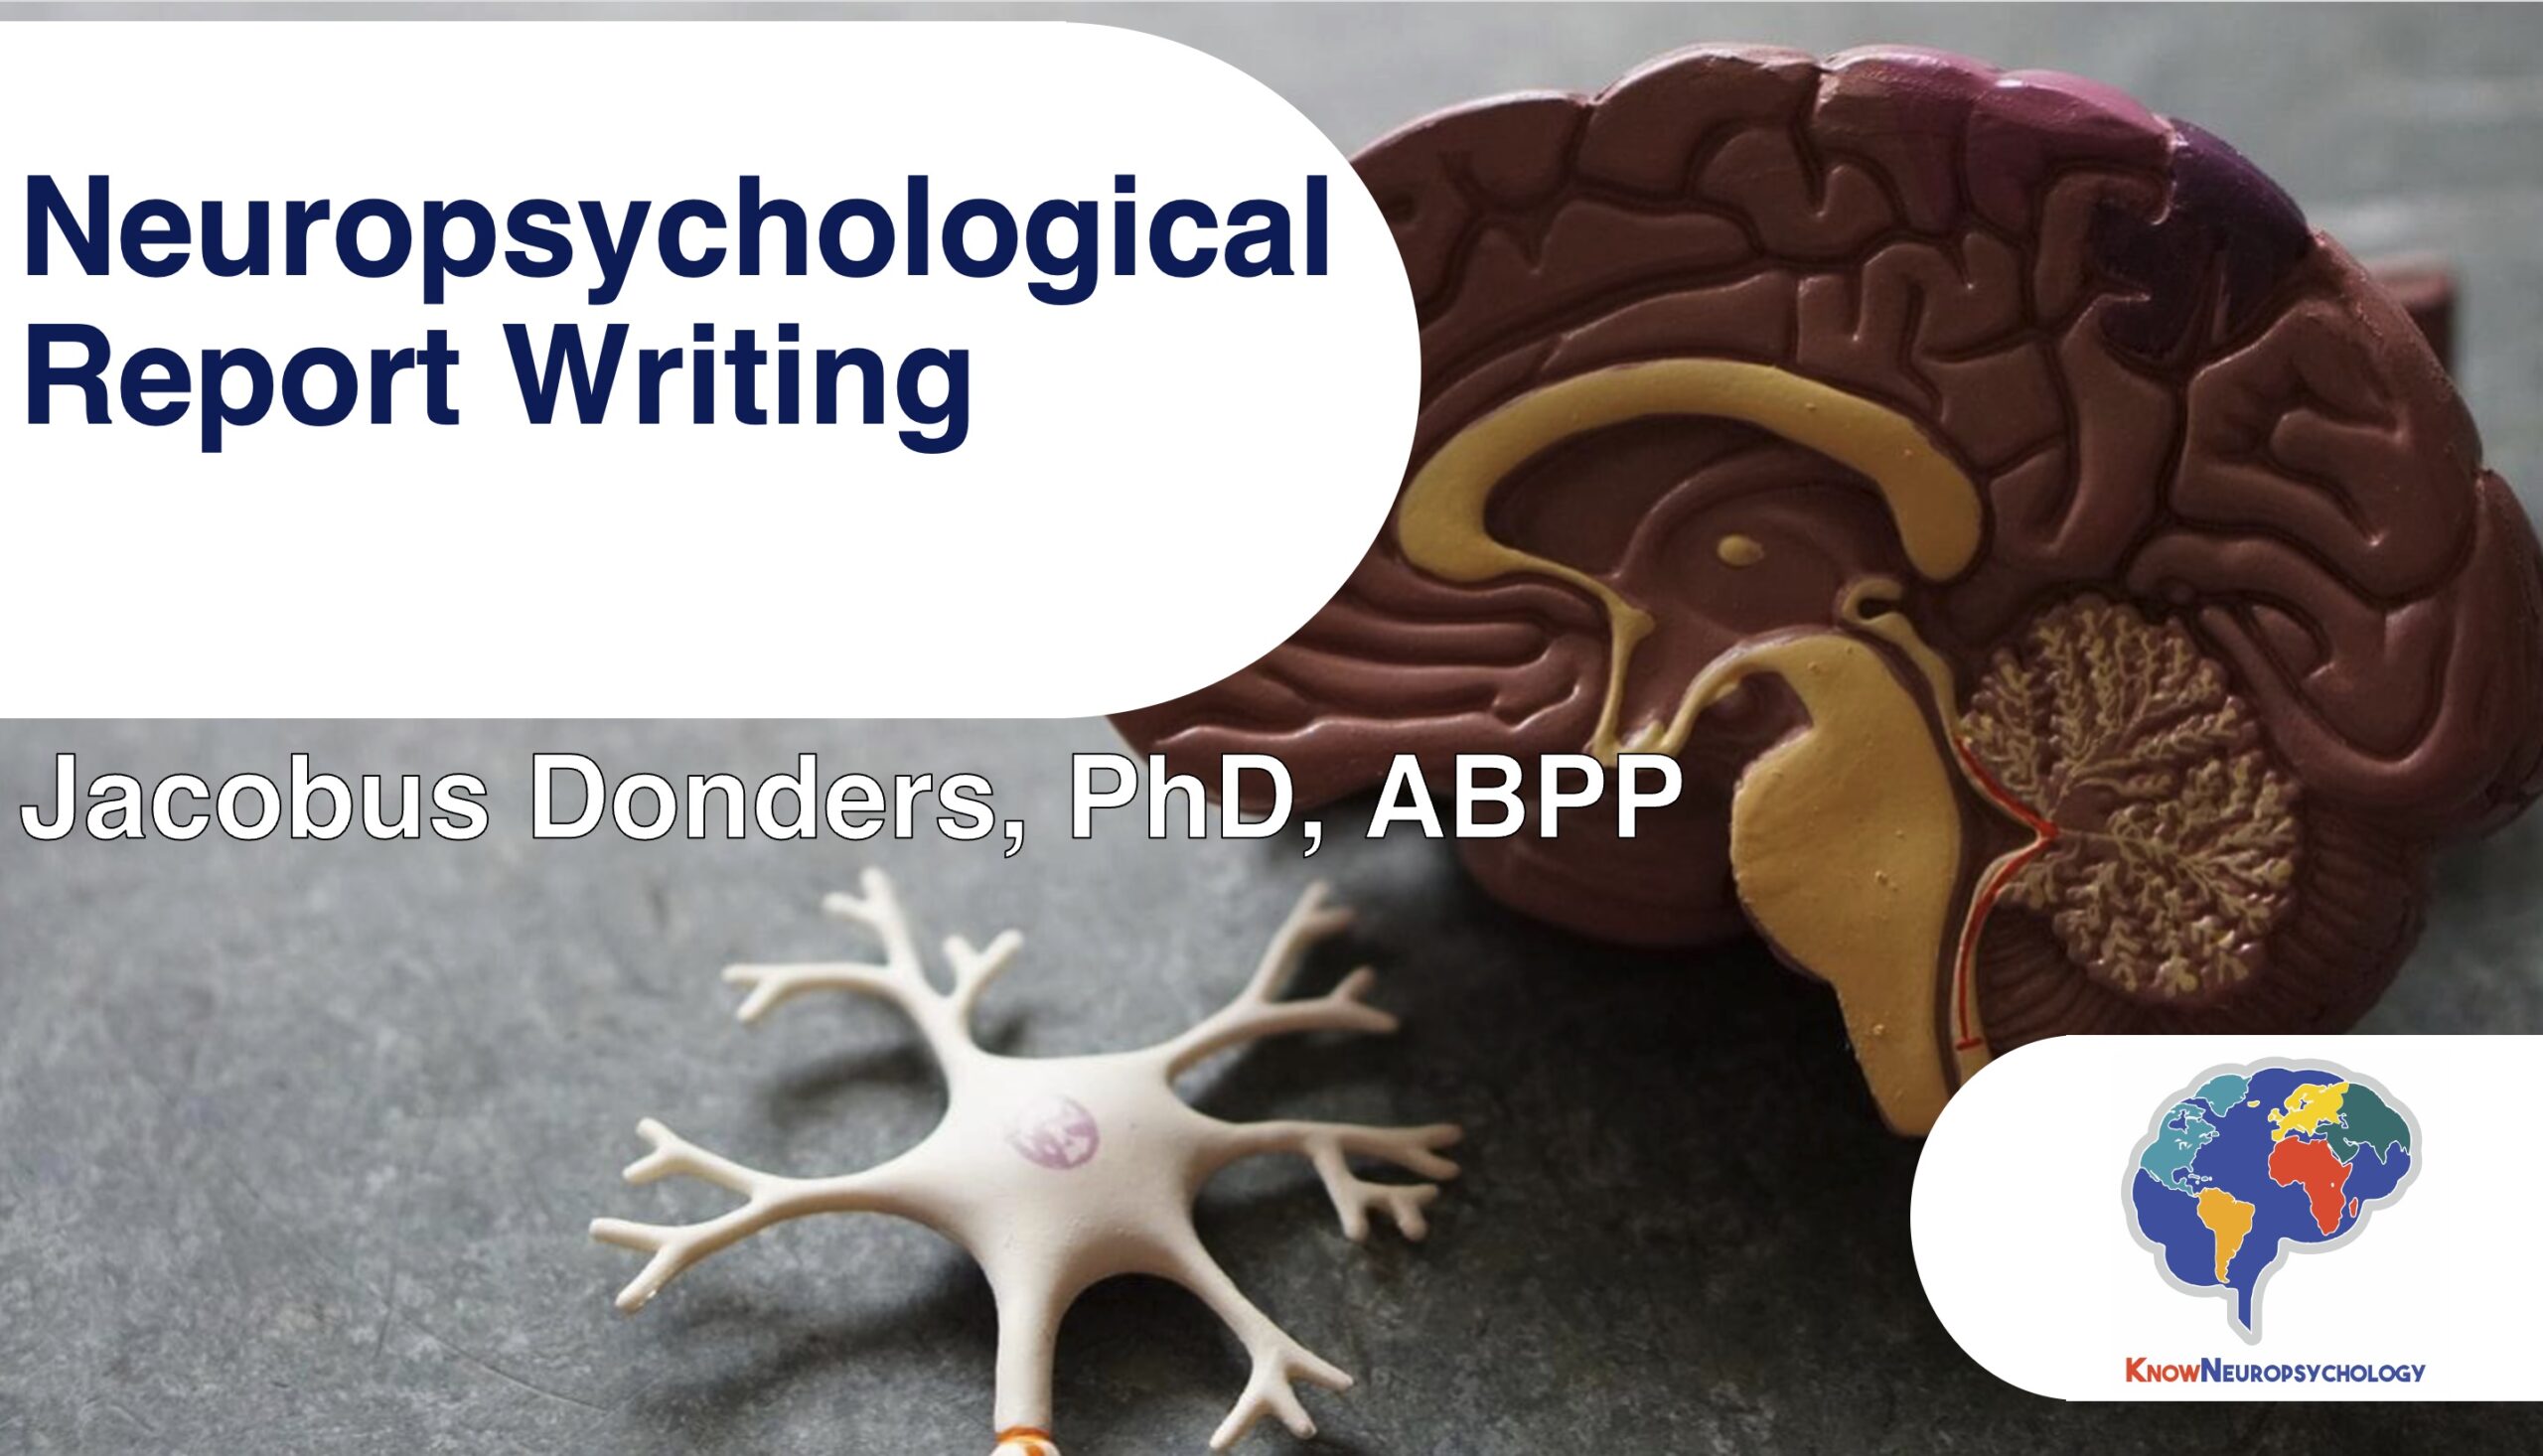 Neuropsychology Report Writing with Dr. Jacobus Donders